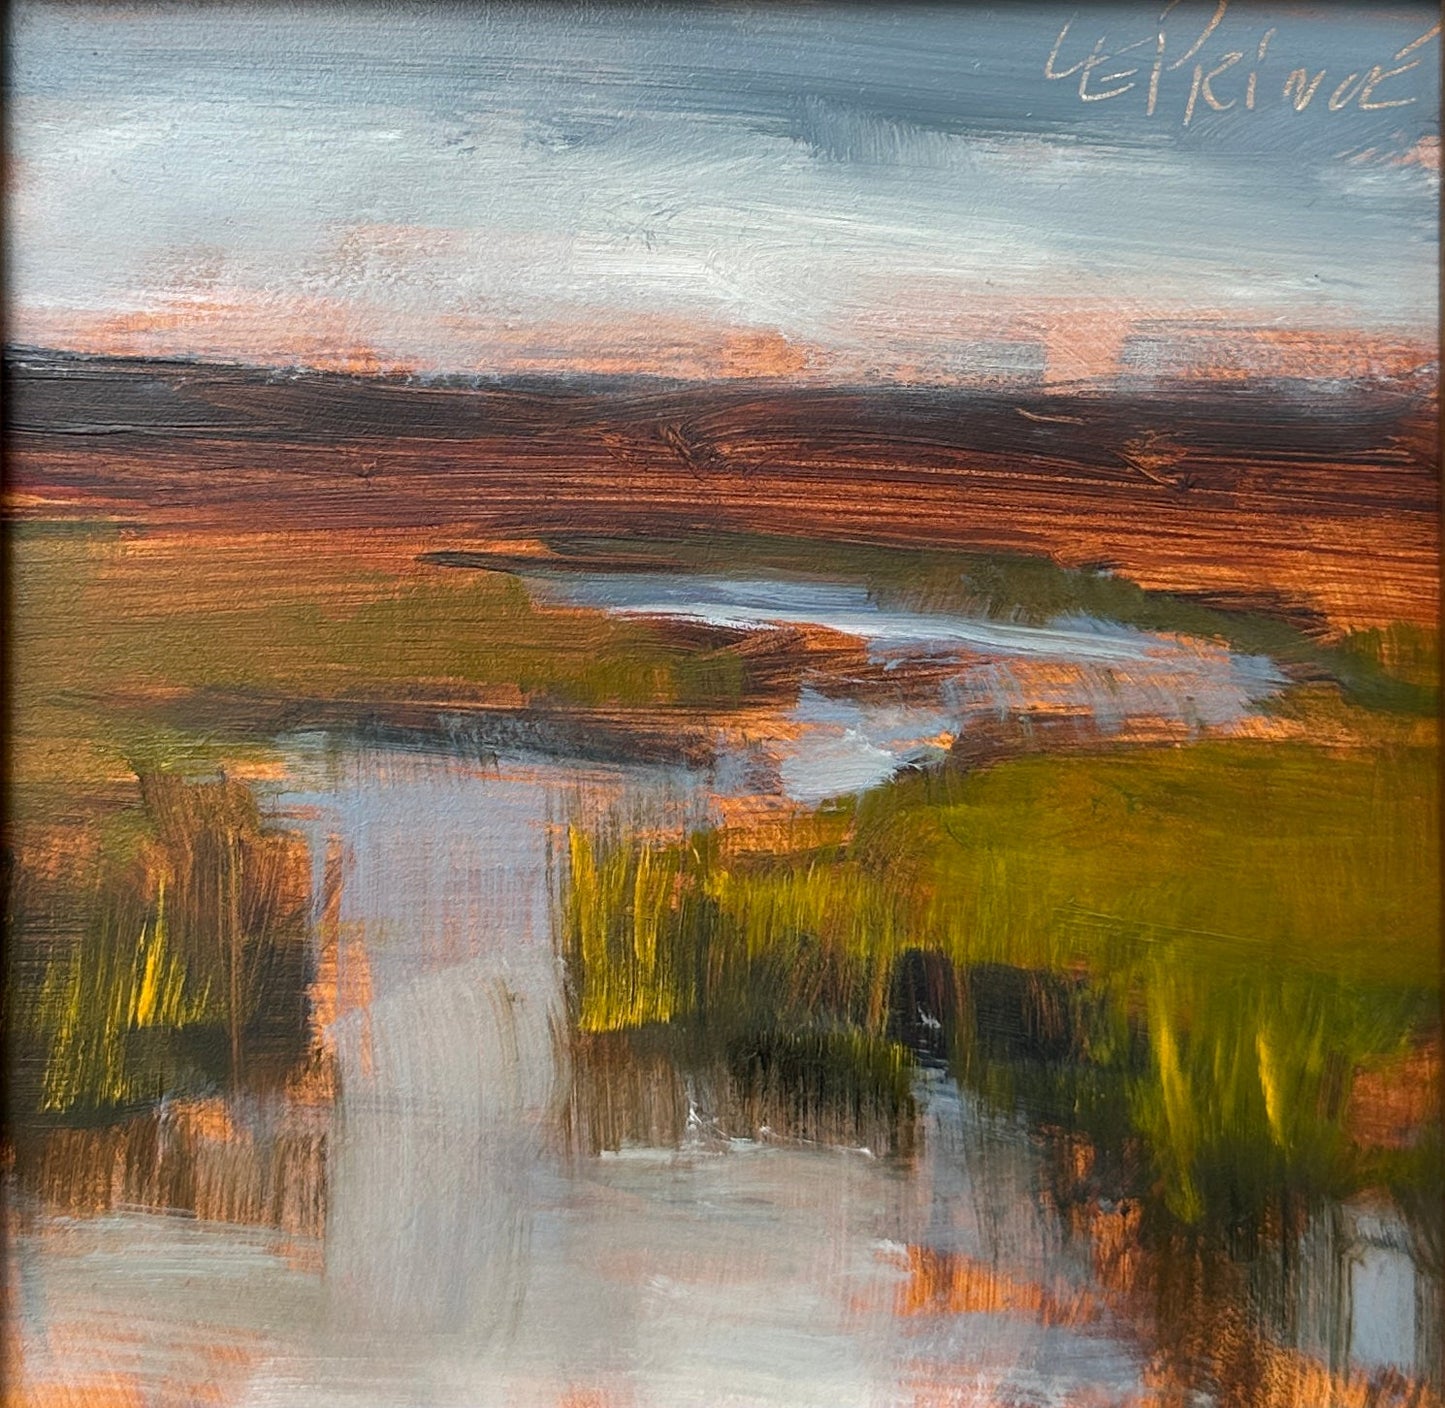 Marsh Matters II by Kevin LePrince at LePrince Galleries